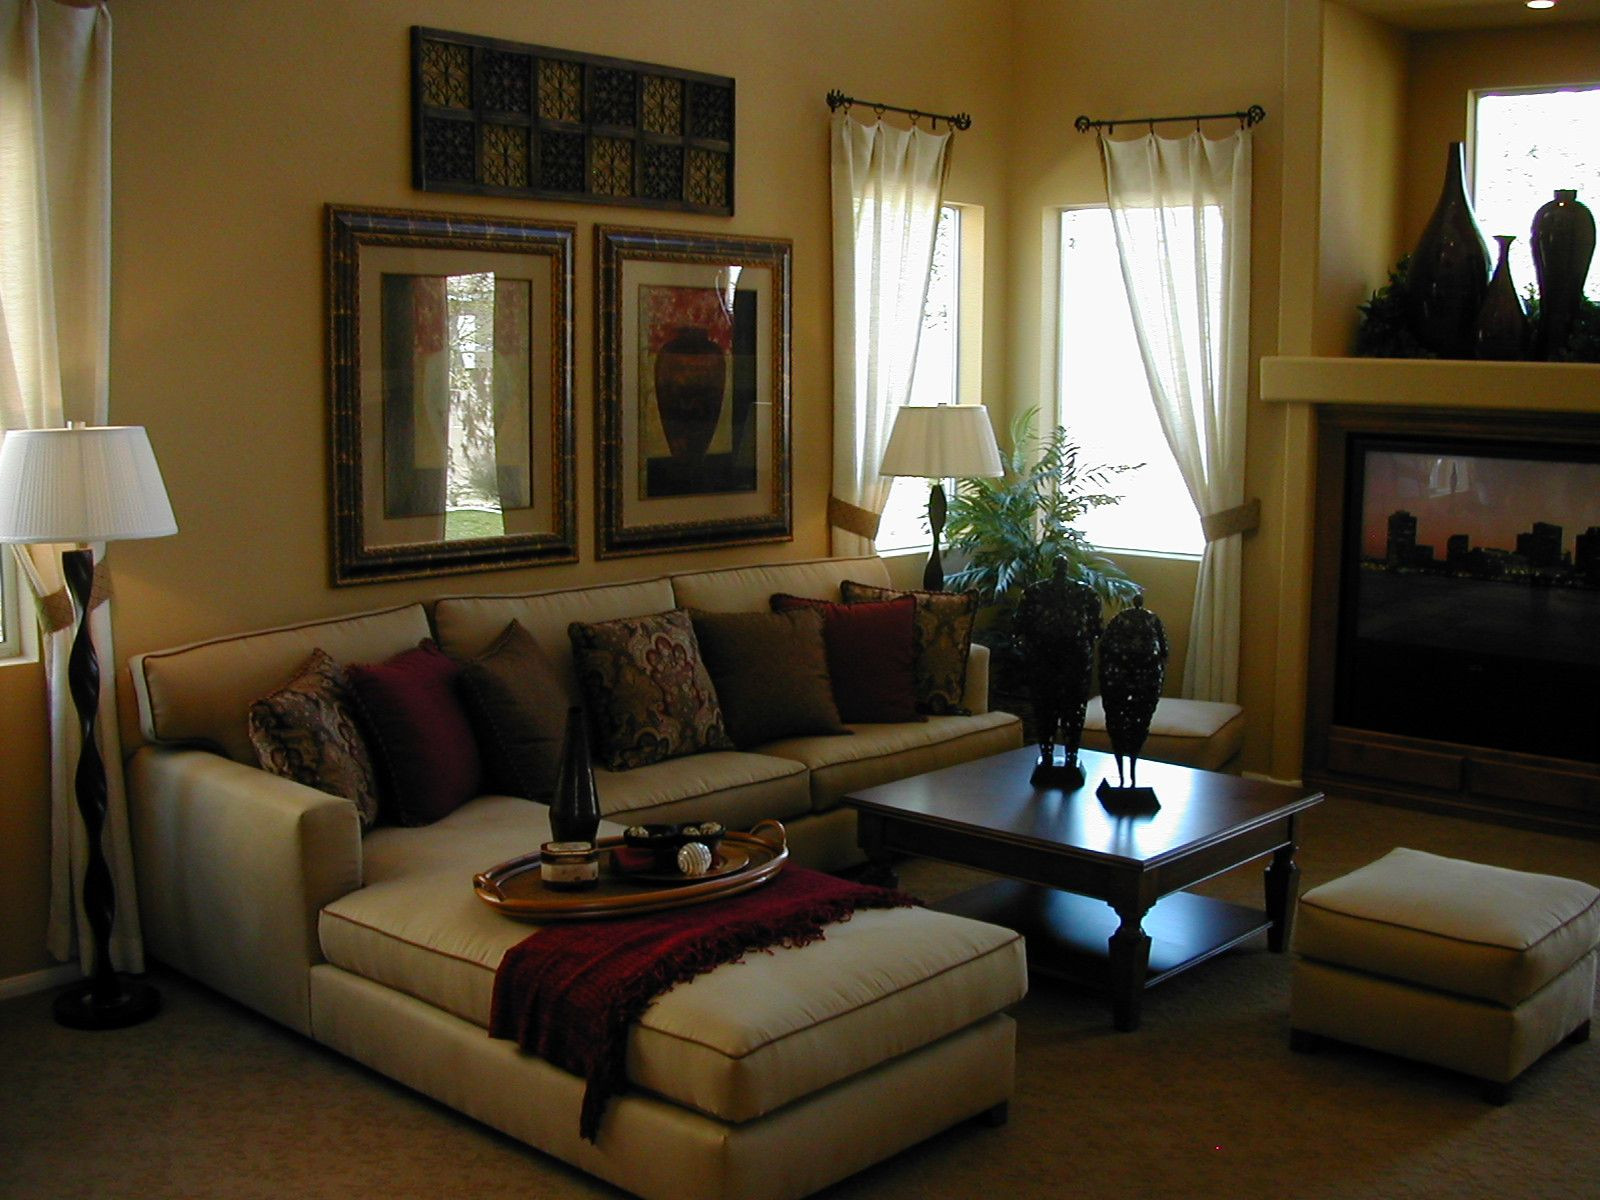 Apartment Living Room Layout Ideas
 Living Room Furniture Layout Ideas for Different Room